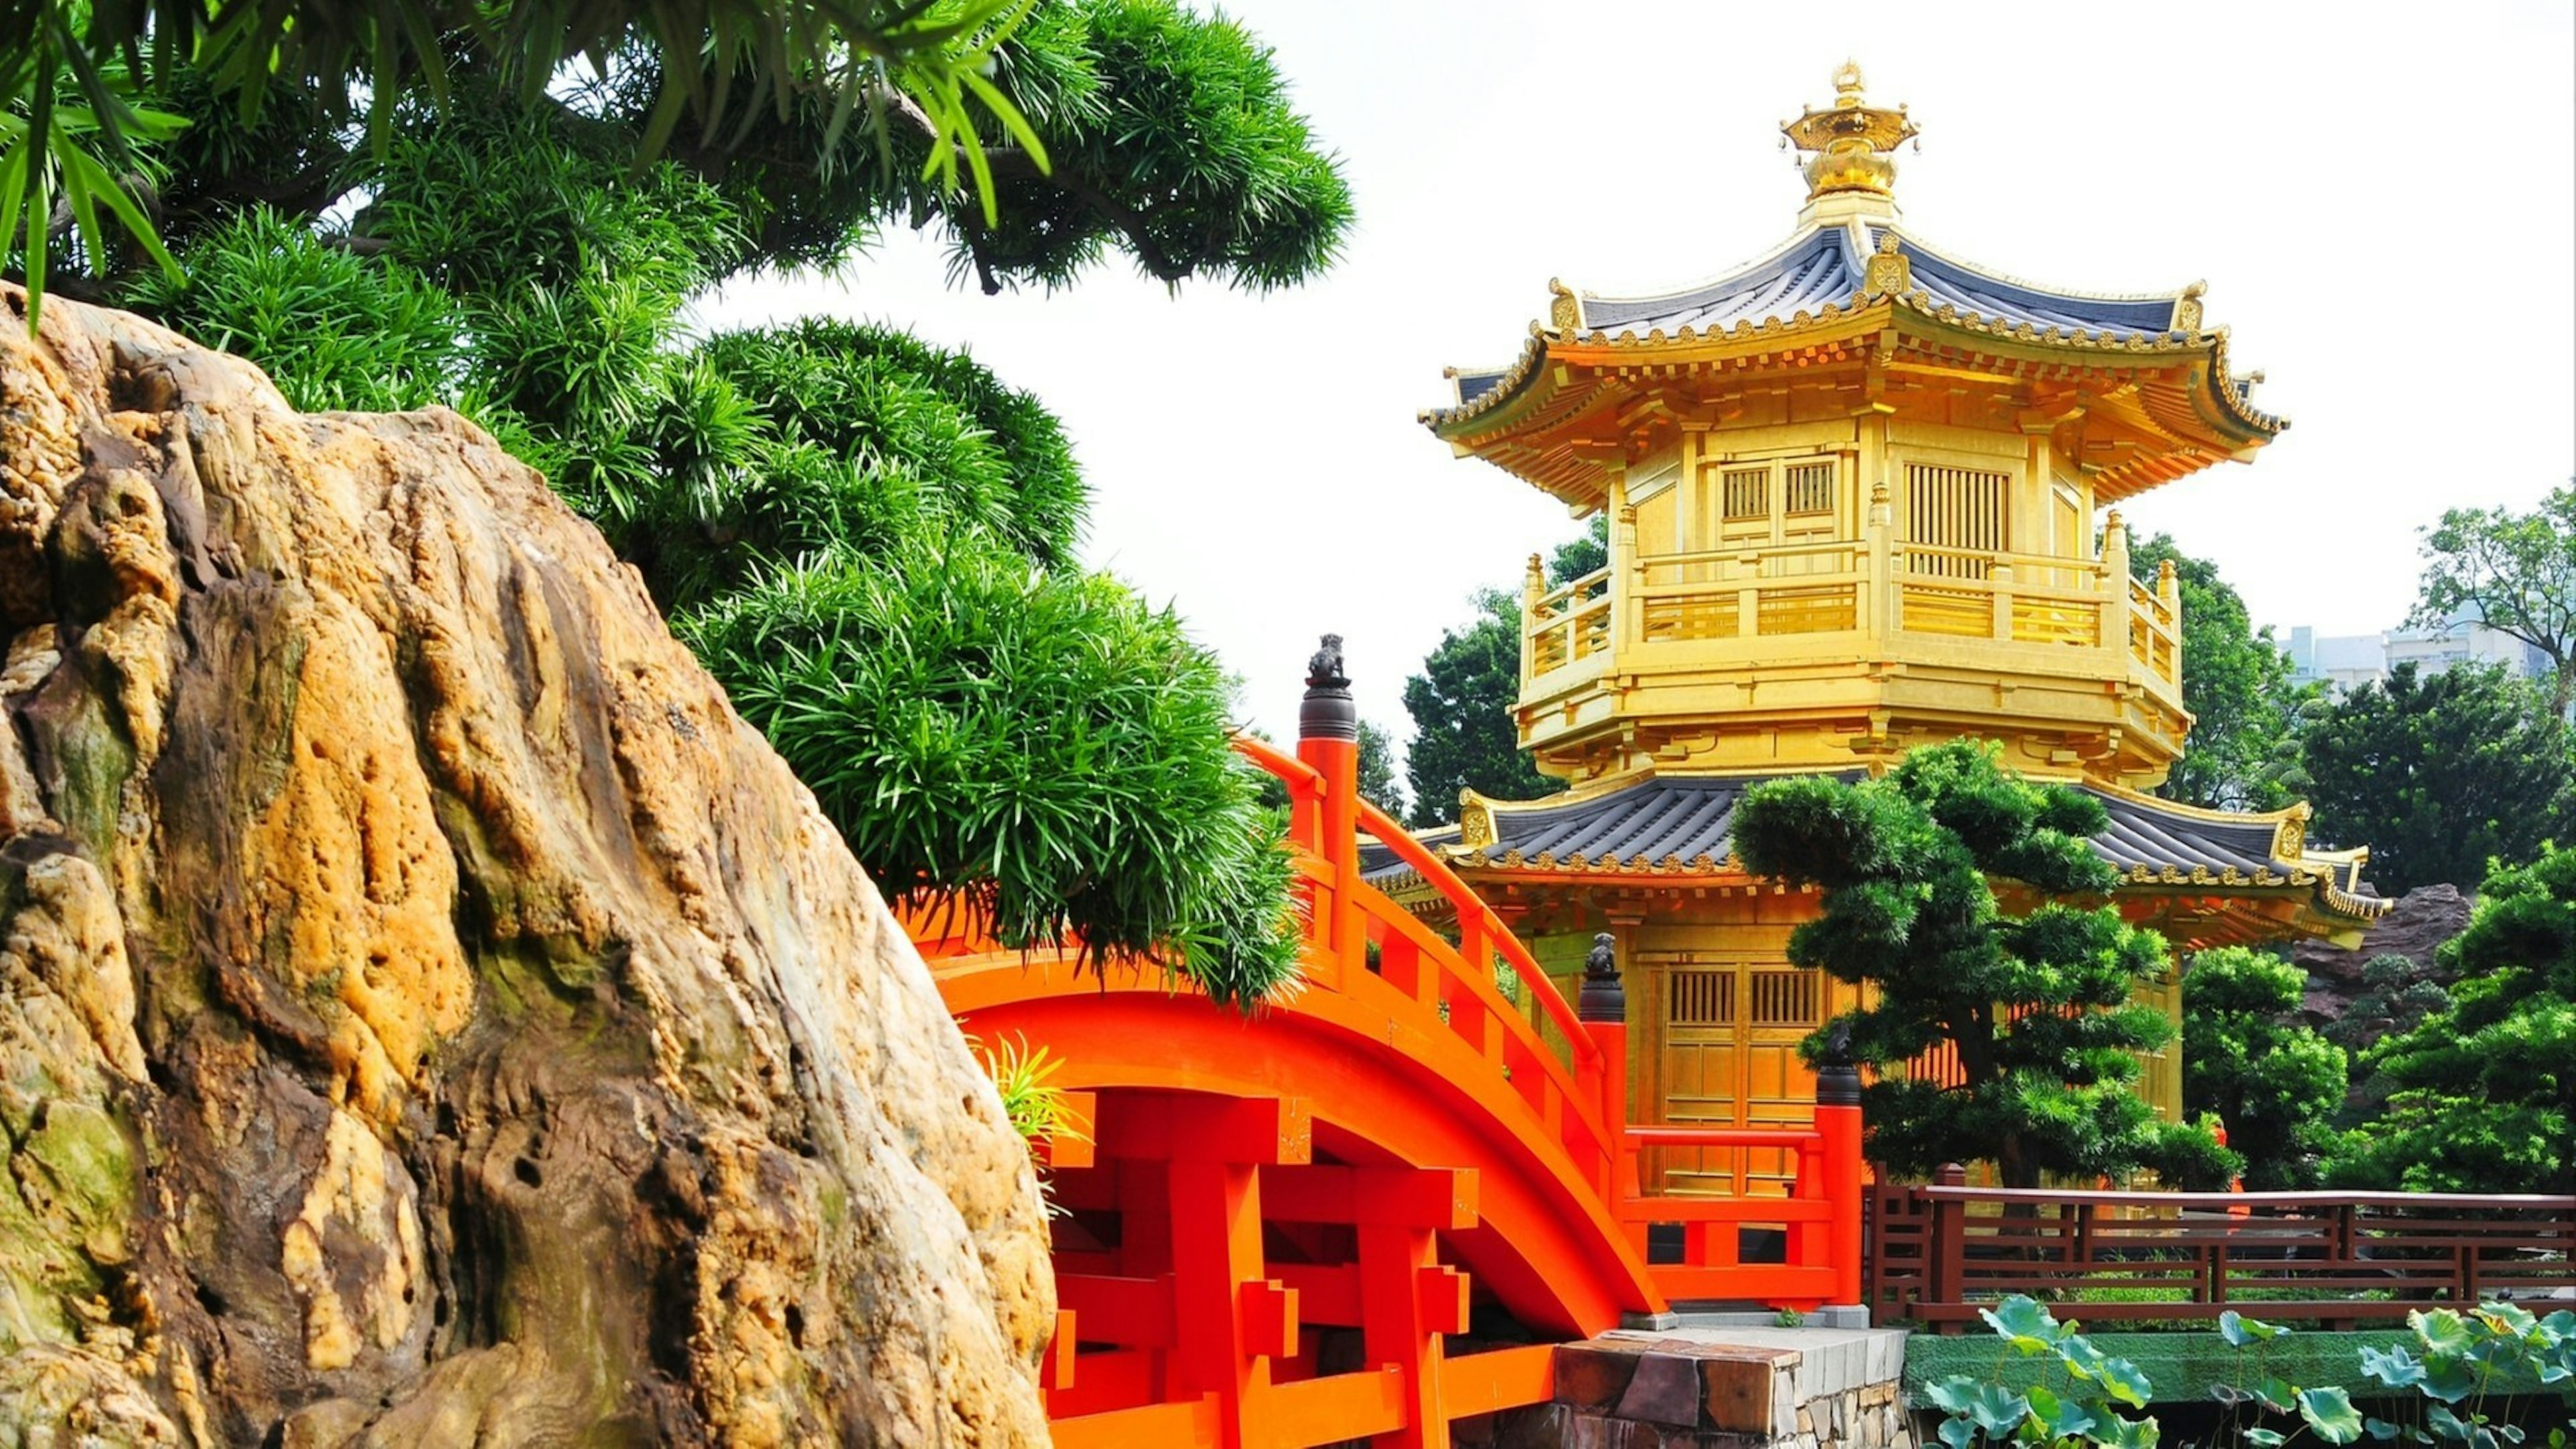 Pagoda style Chinese architecture in garden